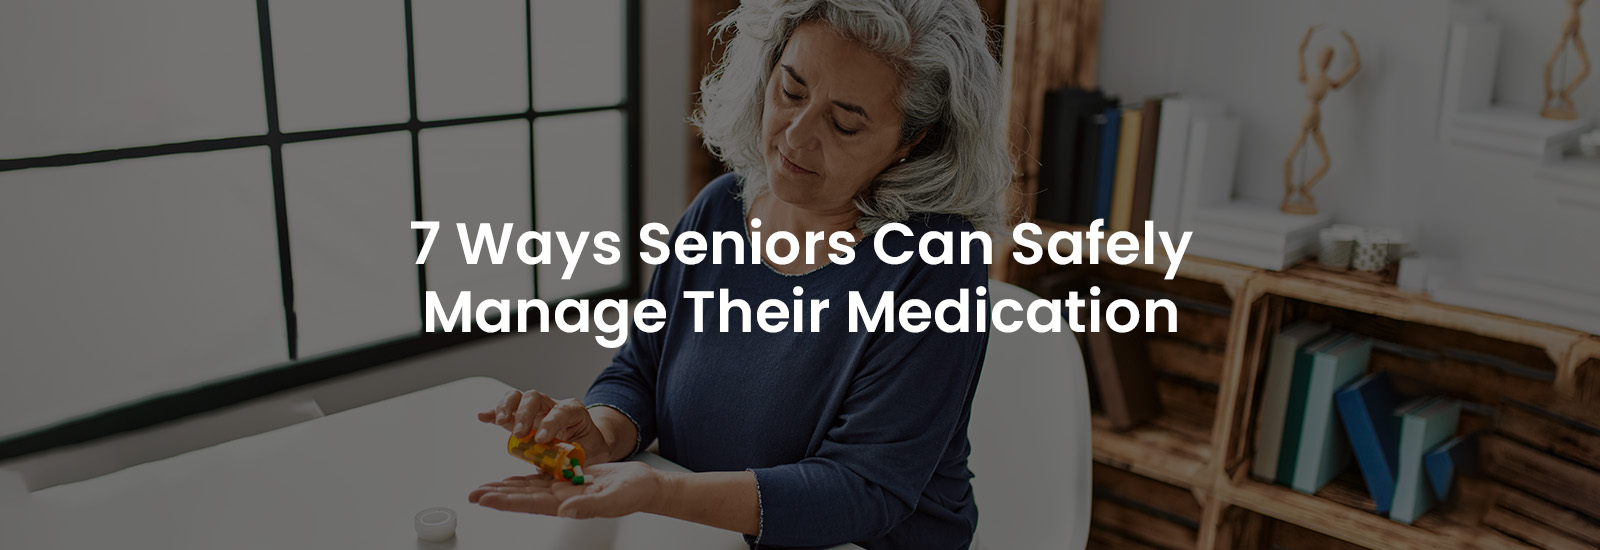 7 Ways Seniors Can Safely Manage Their Medication | Banner Image